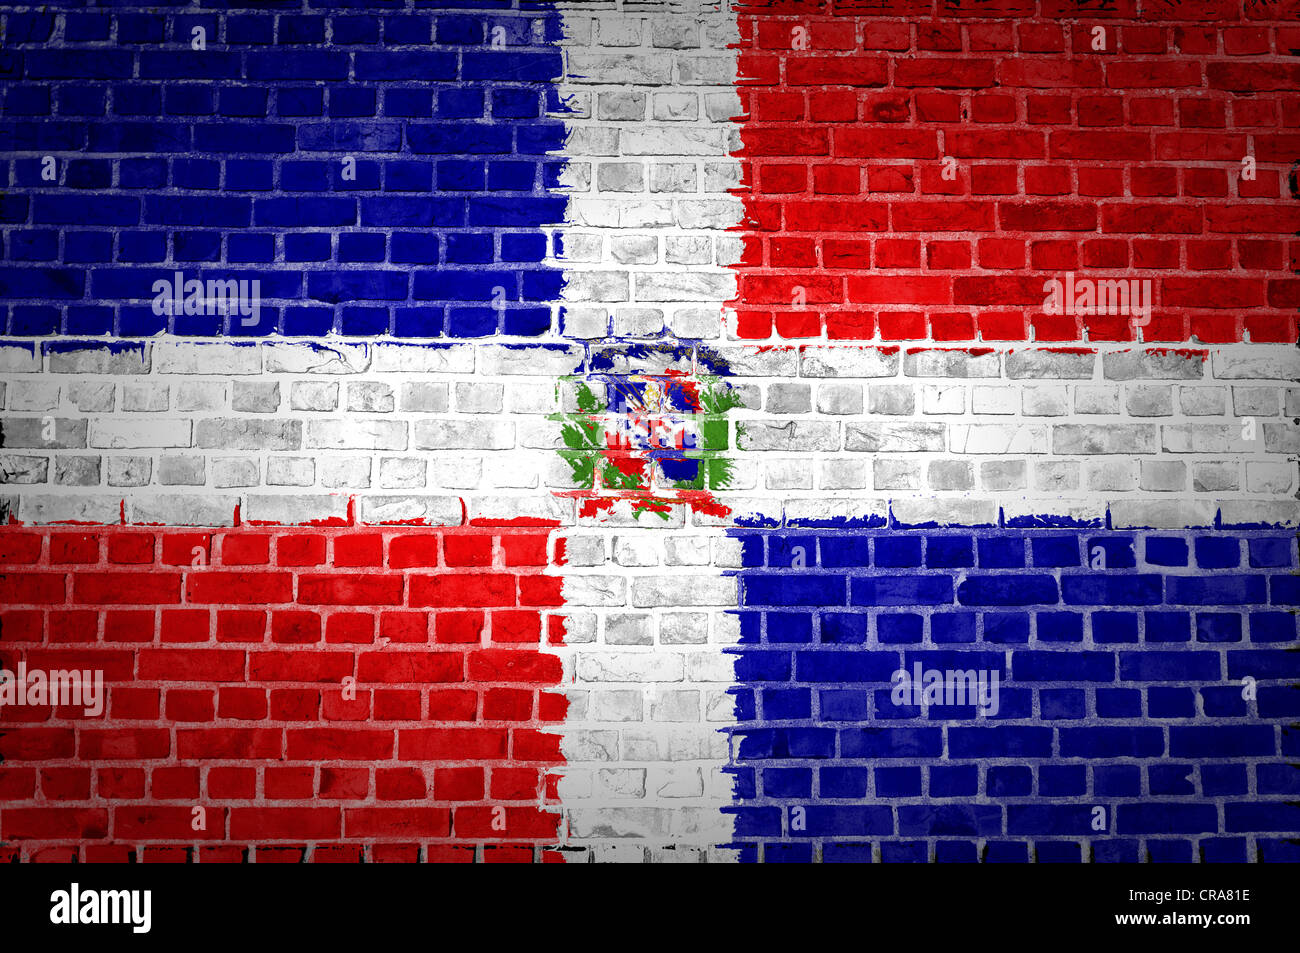 An image of the Dominican Republic flag painted on a brick wall in an urban location Stock Photo